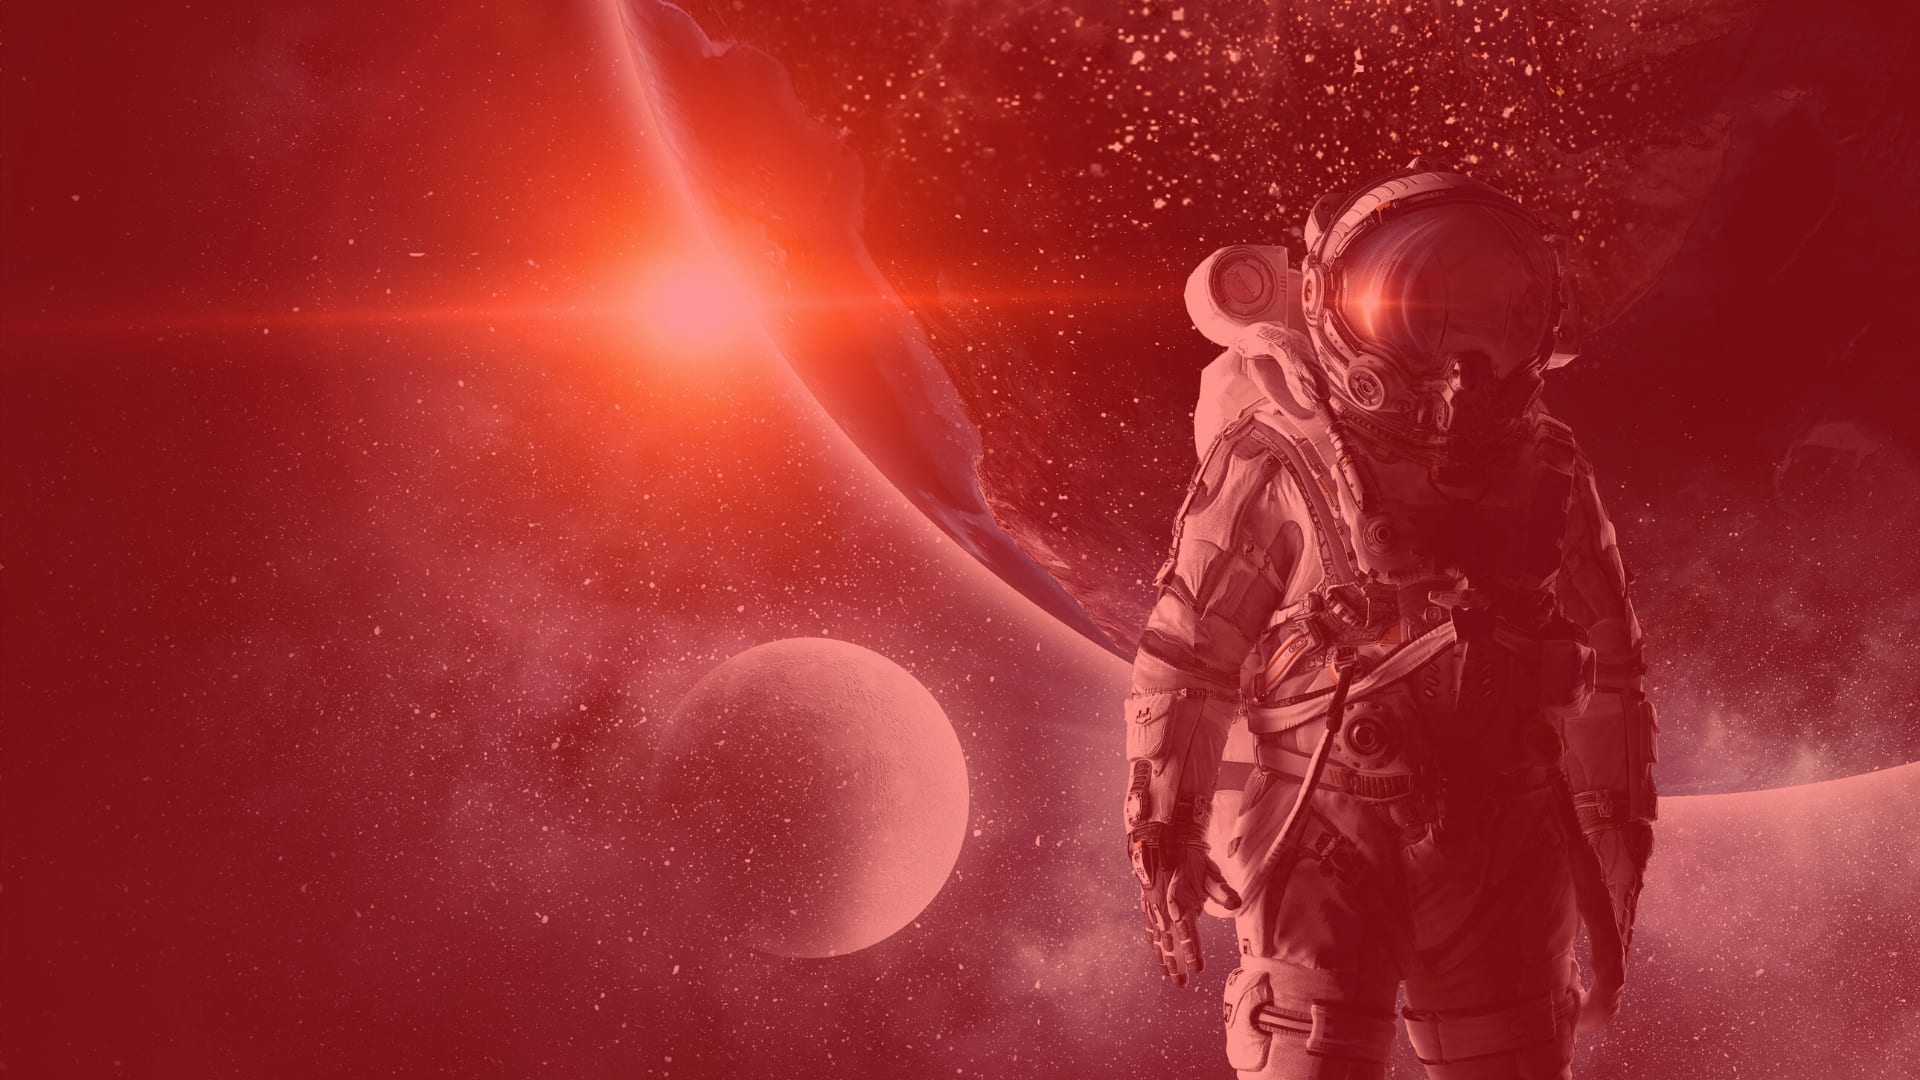 Red Space wallpaper Download on 24wallpaper